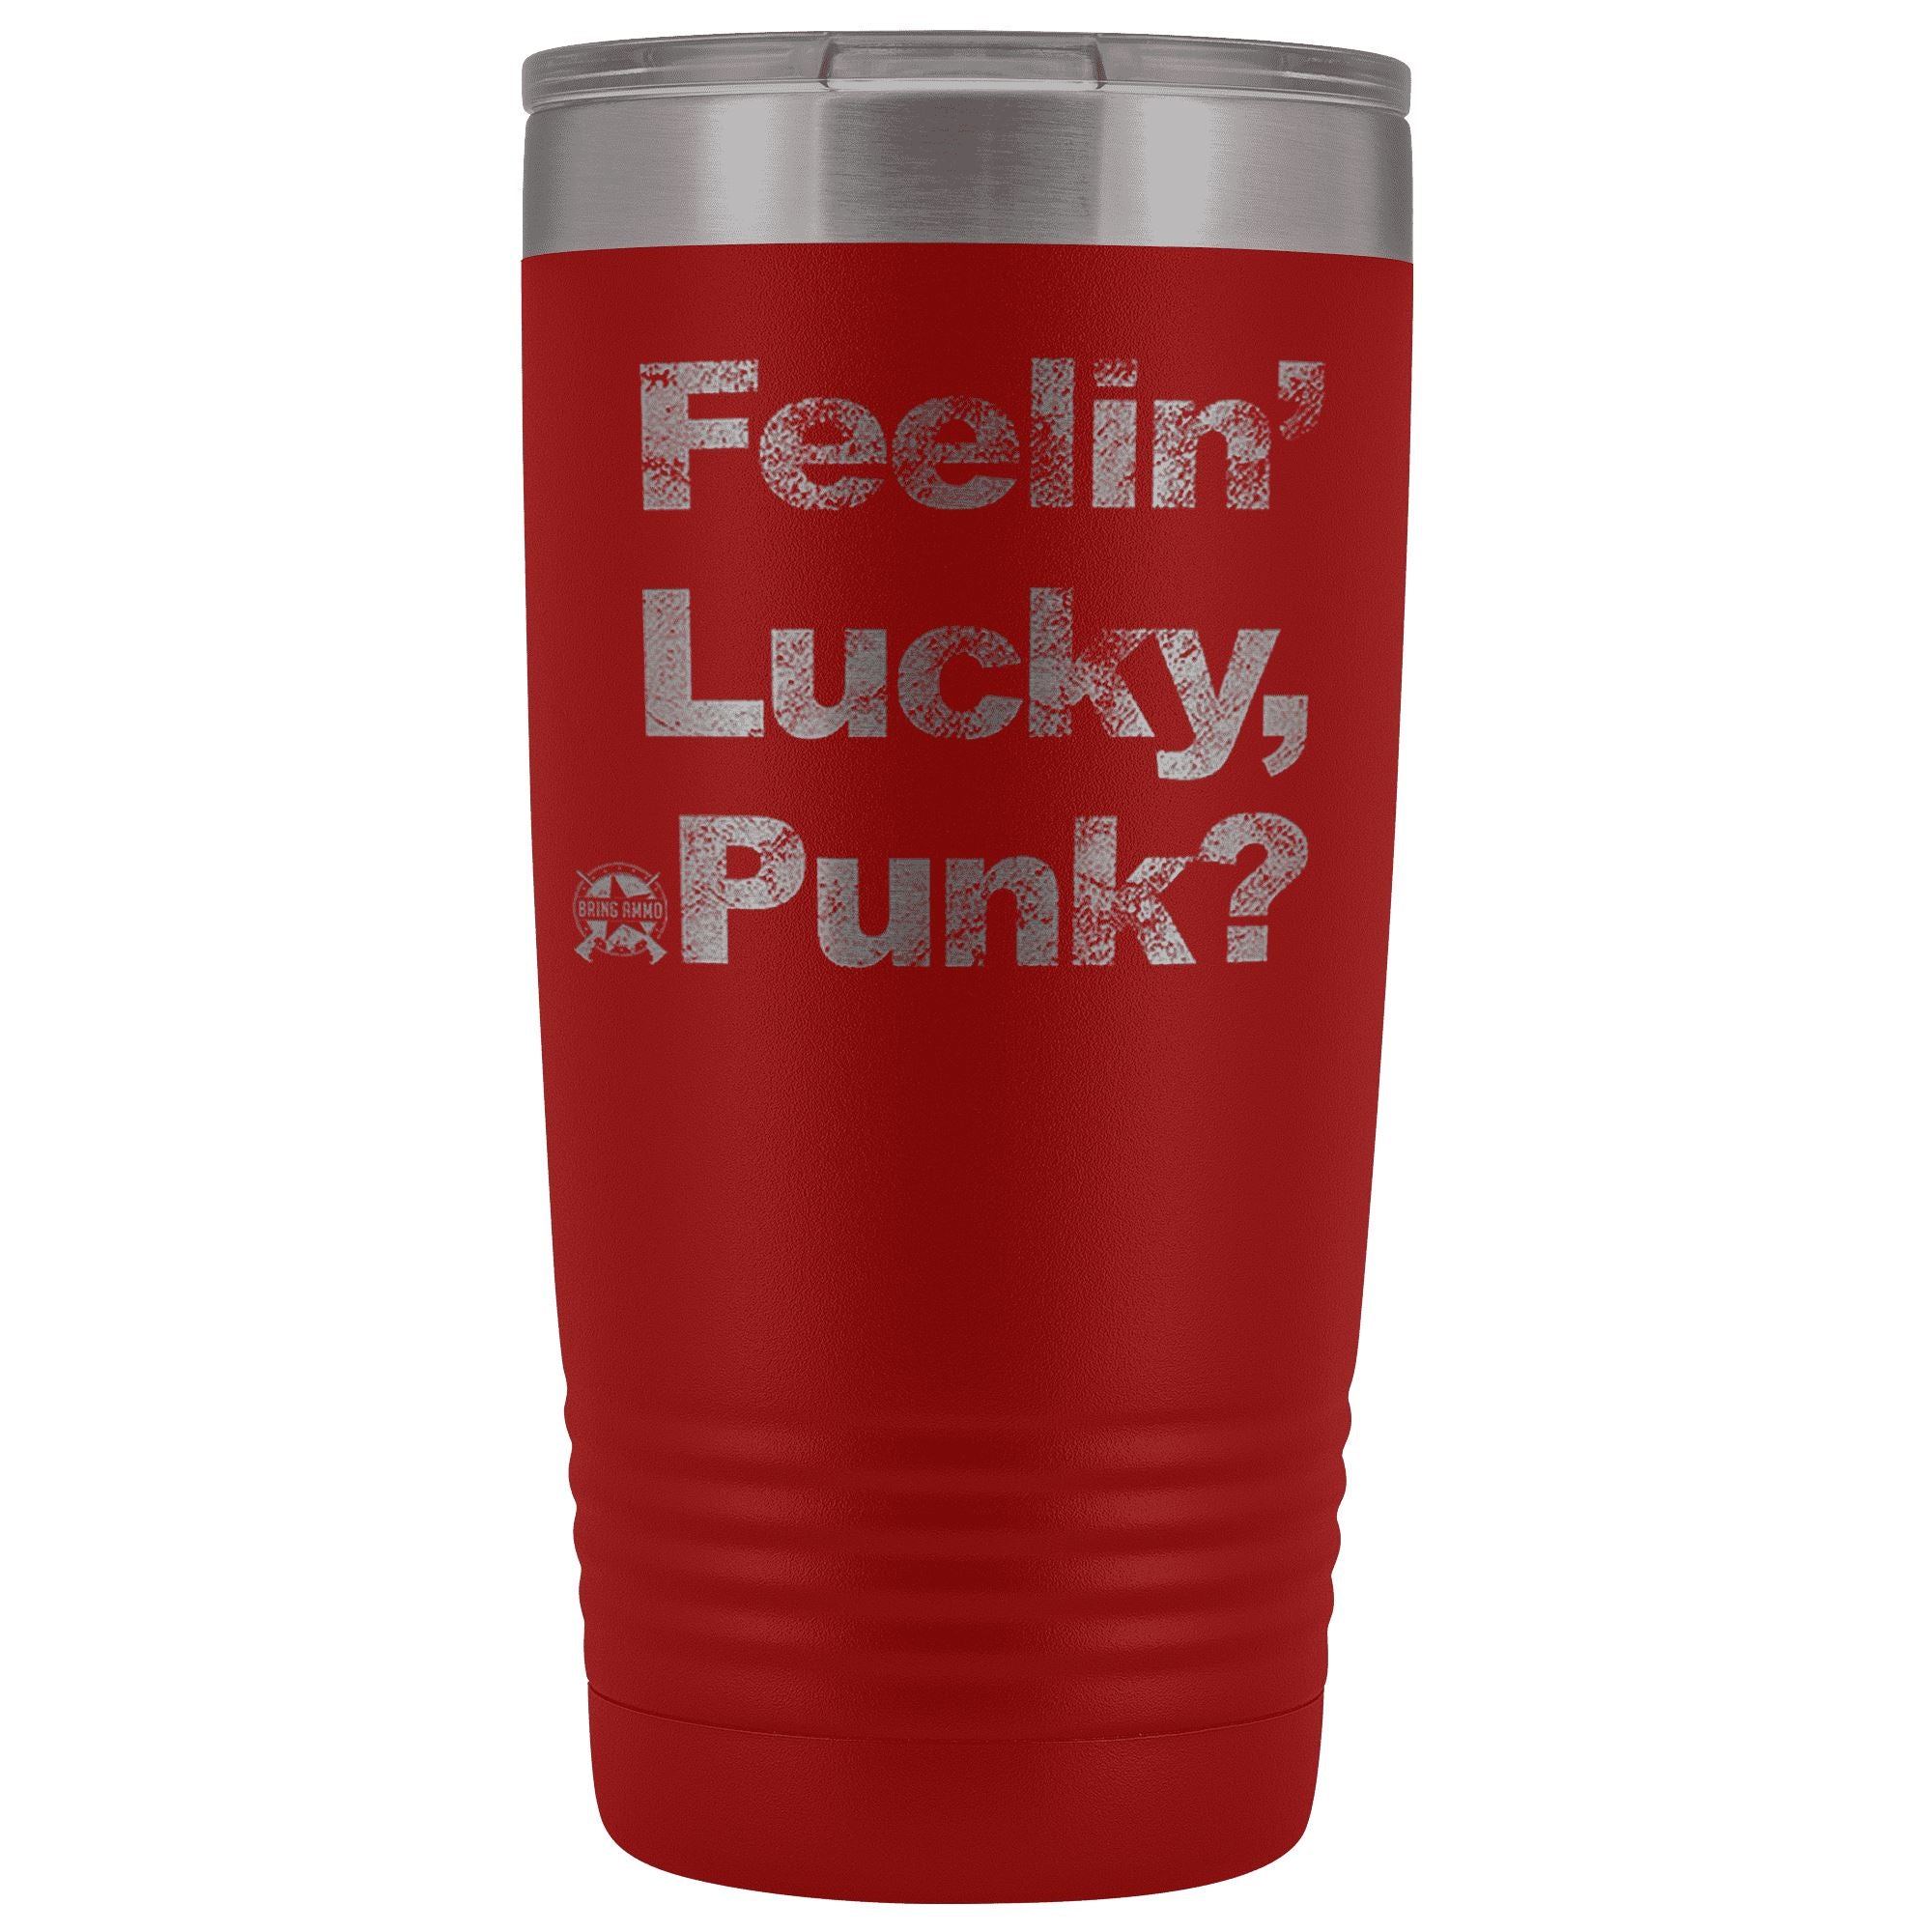 Feelin' Lucky, Punk? Dirty Harry Stainless Etched Tumbler Tumblers Red 